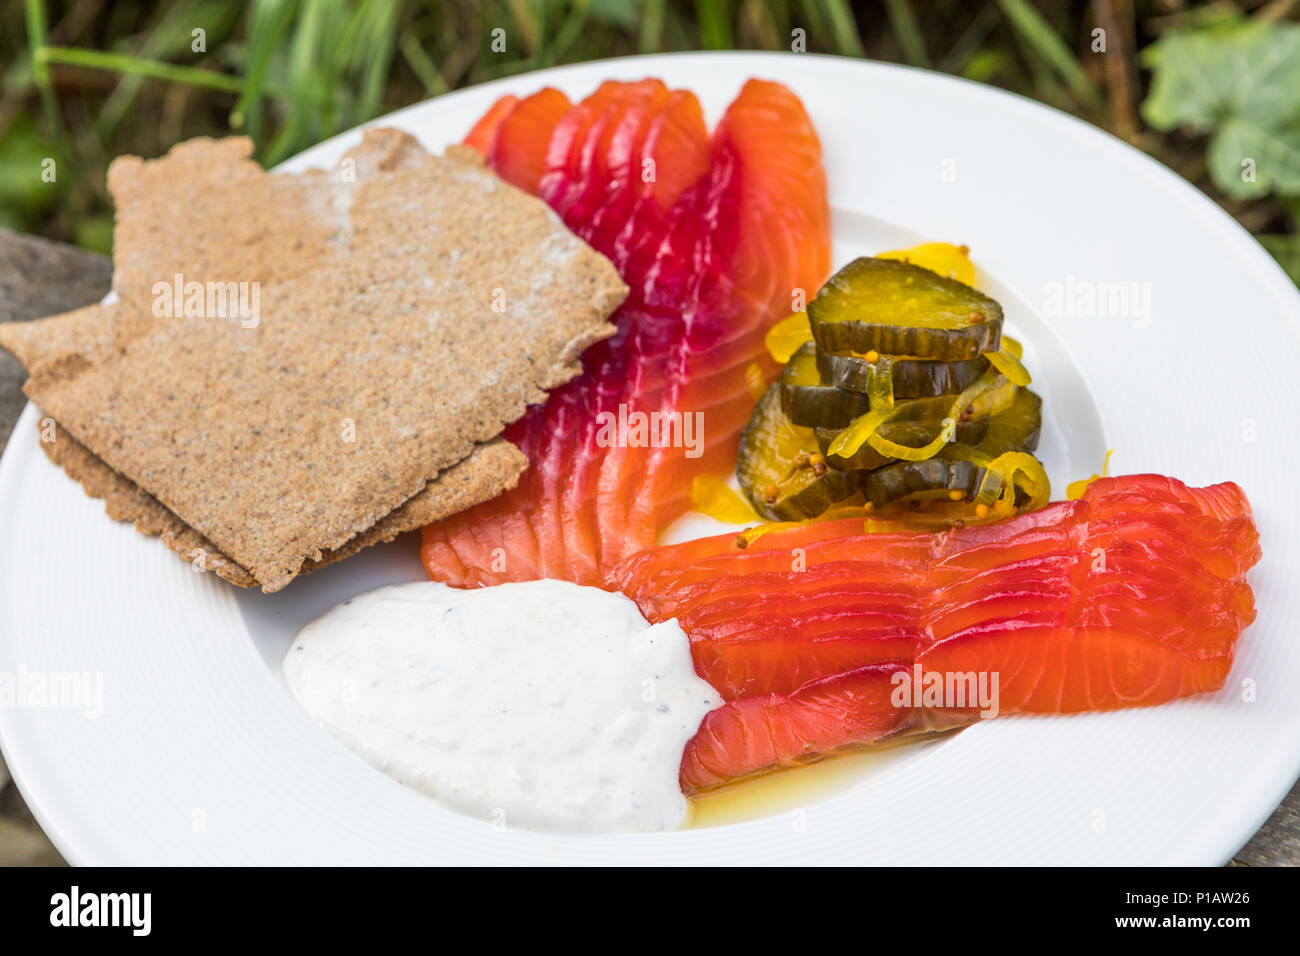 Beetroot cured salmon with pickles, rye crispbread and horse radish cream. Stock Photo